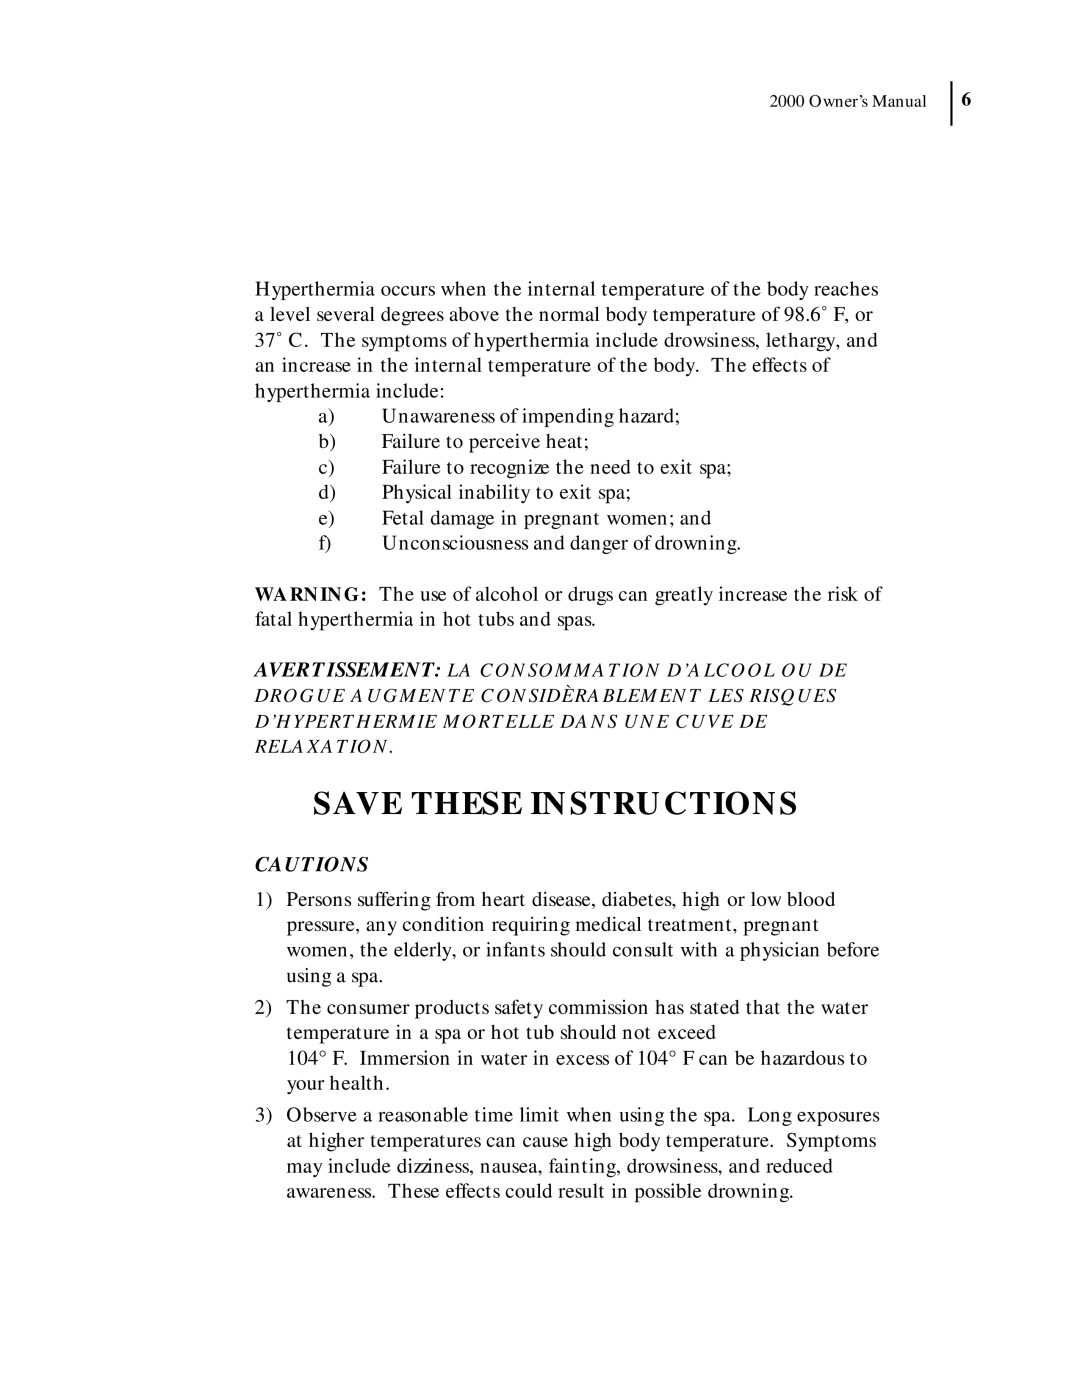 Dimension One Spas 2000 Model manual Cautions, Save These Instructions 